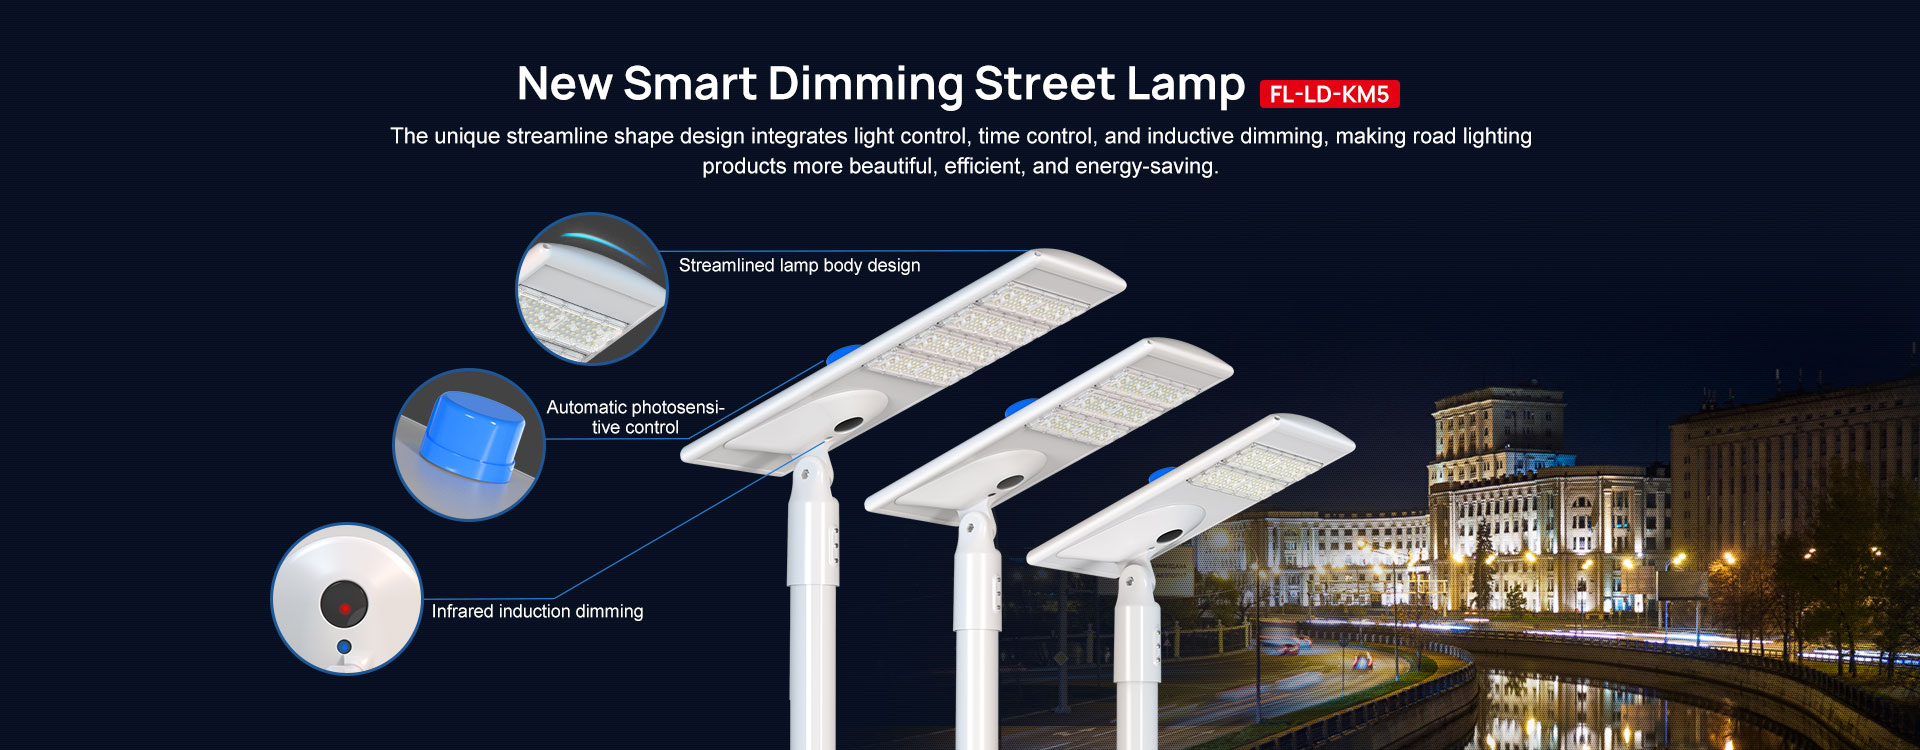 New smart dimming street lamps